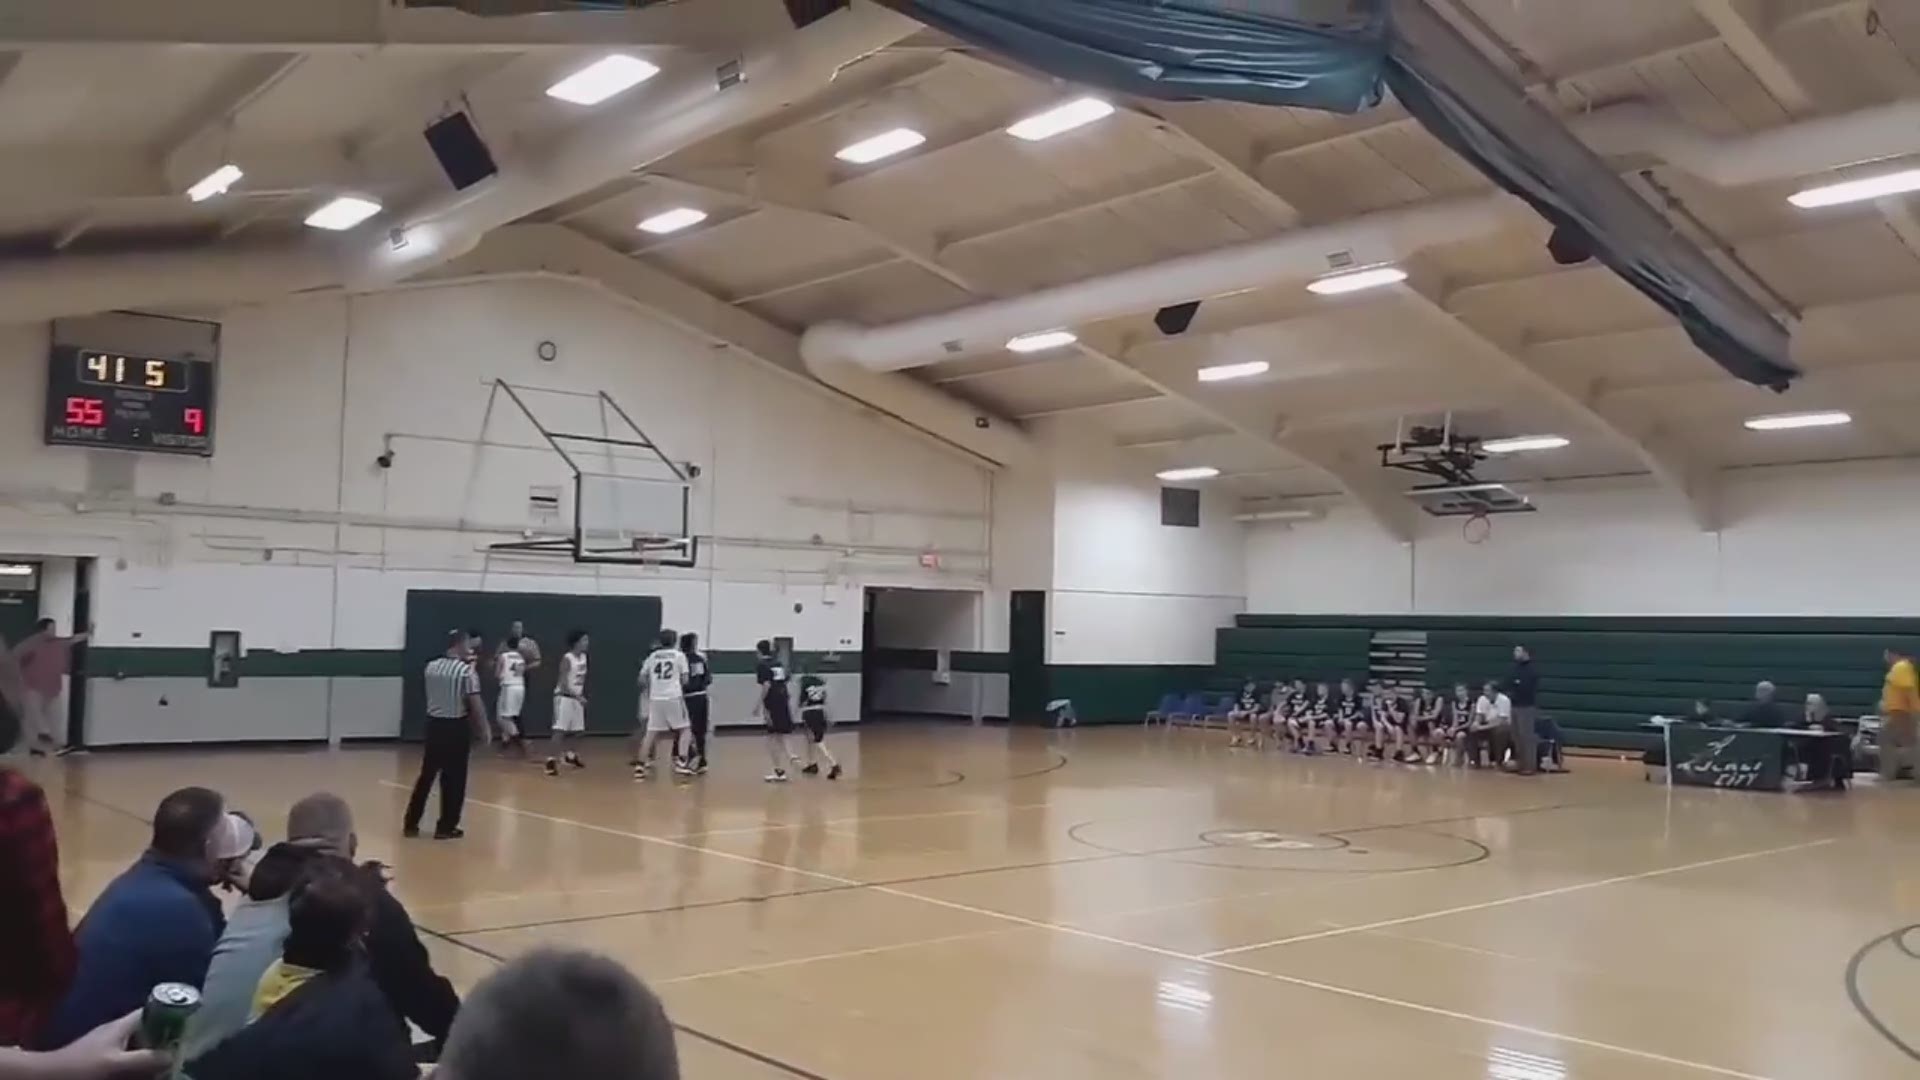 John Underwood is a student and basketball team manager at Reeths-Puffer Middle School, but he got asked to play Monday night, and what happened next was amazing.